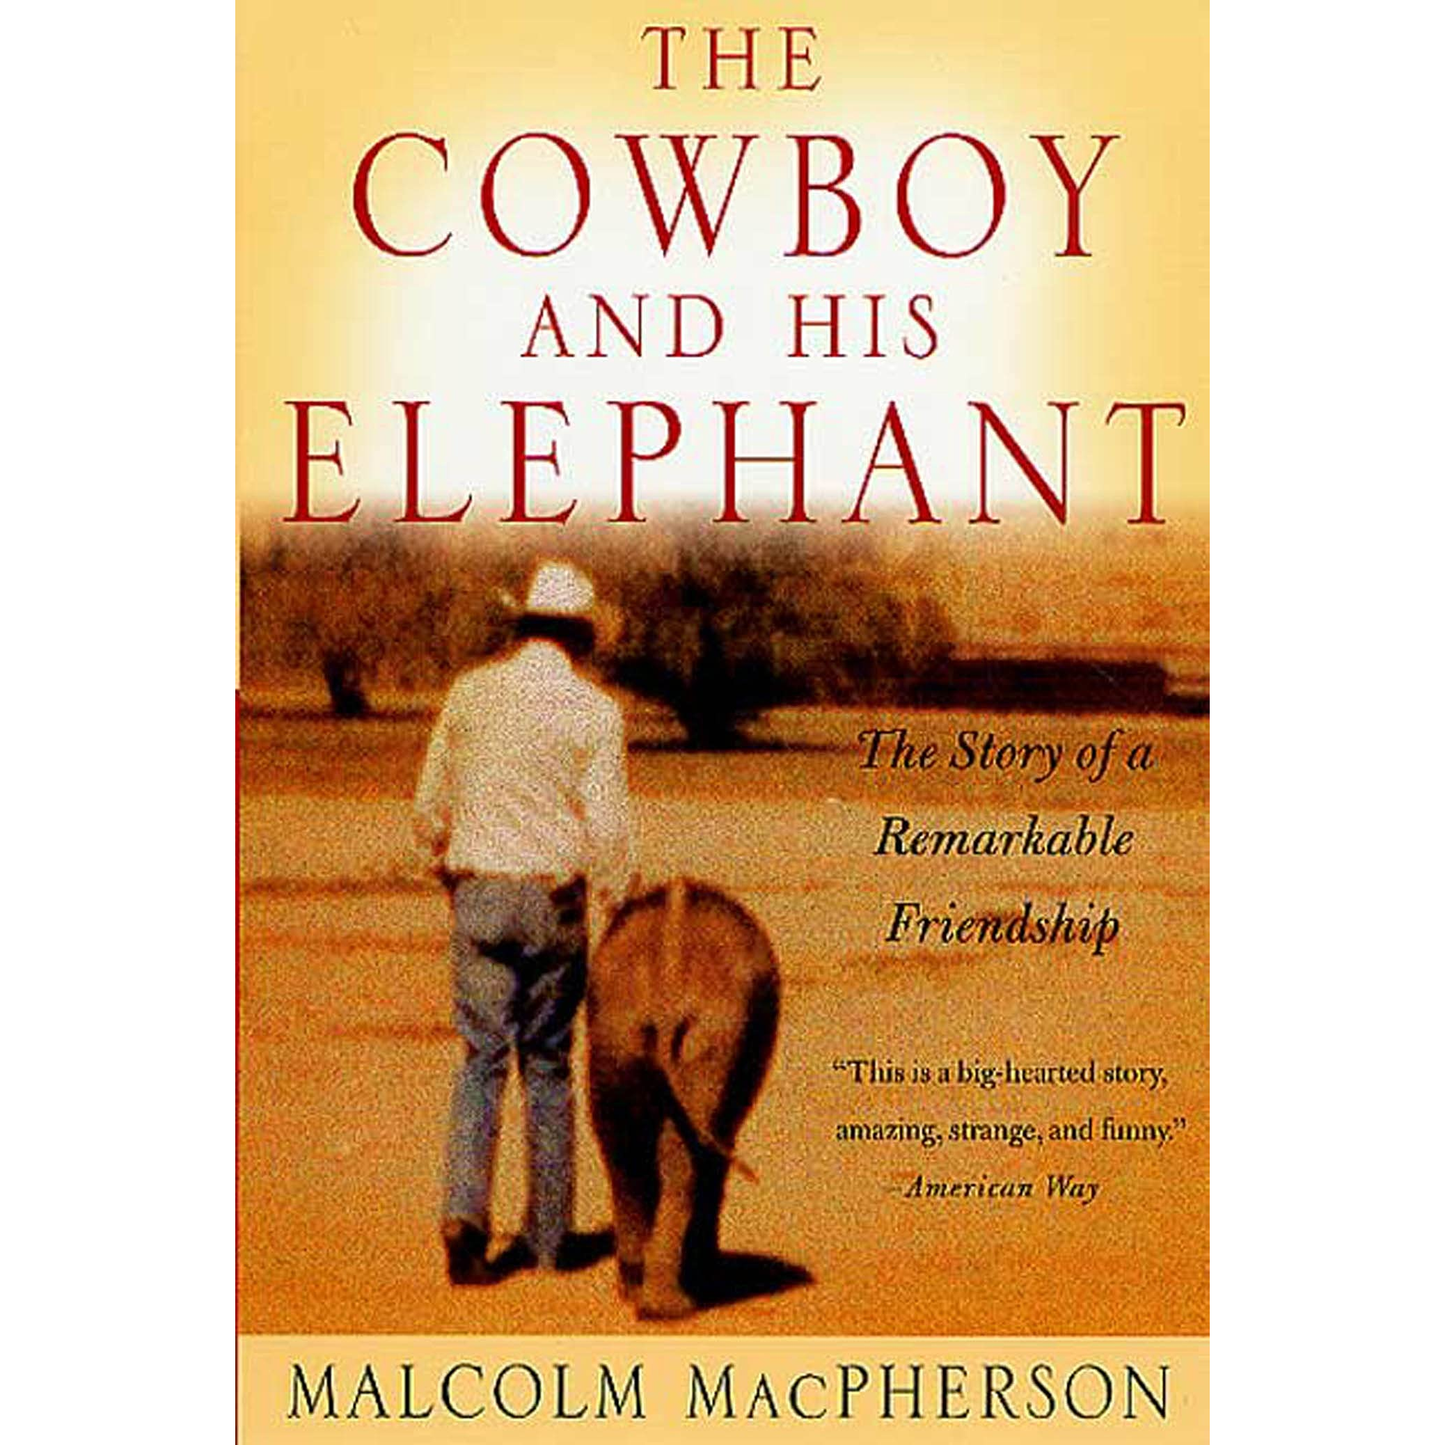 The Cowboy and His Elephant: The Story of a Remarkable Friendship by Malcolm Macpherson